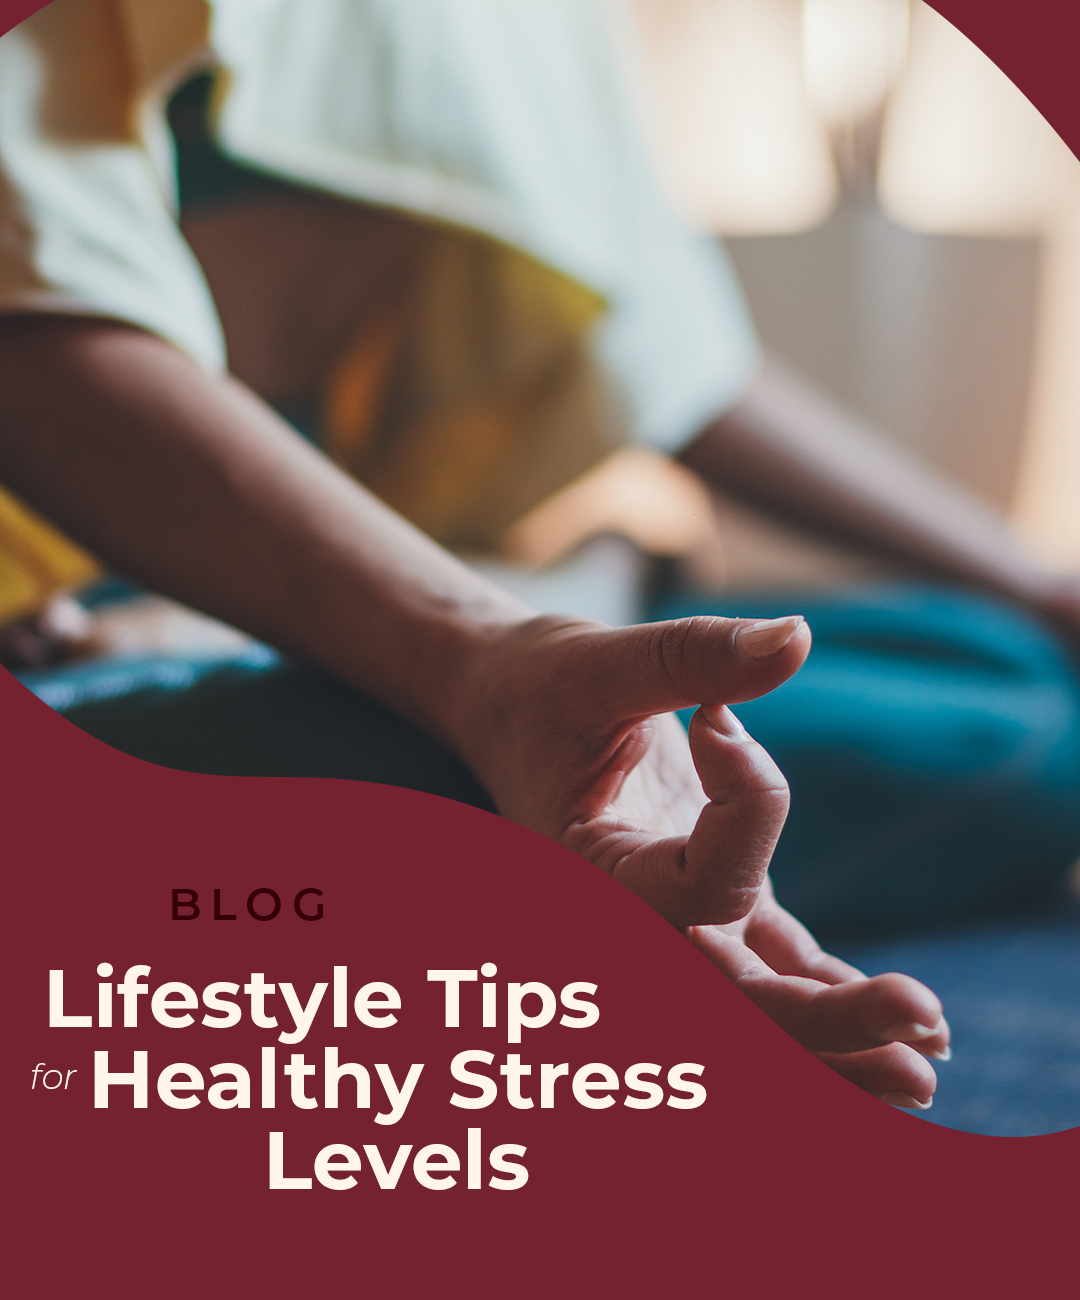 Lifestyle tips for healthy stress levels